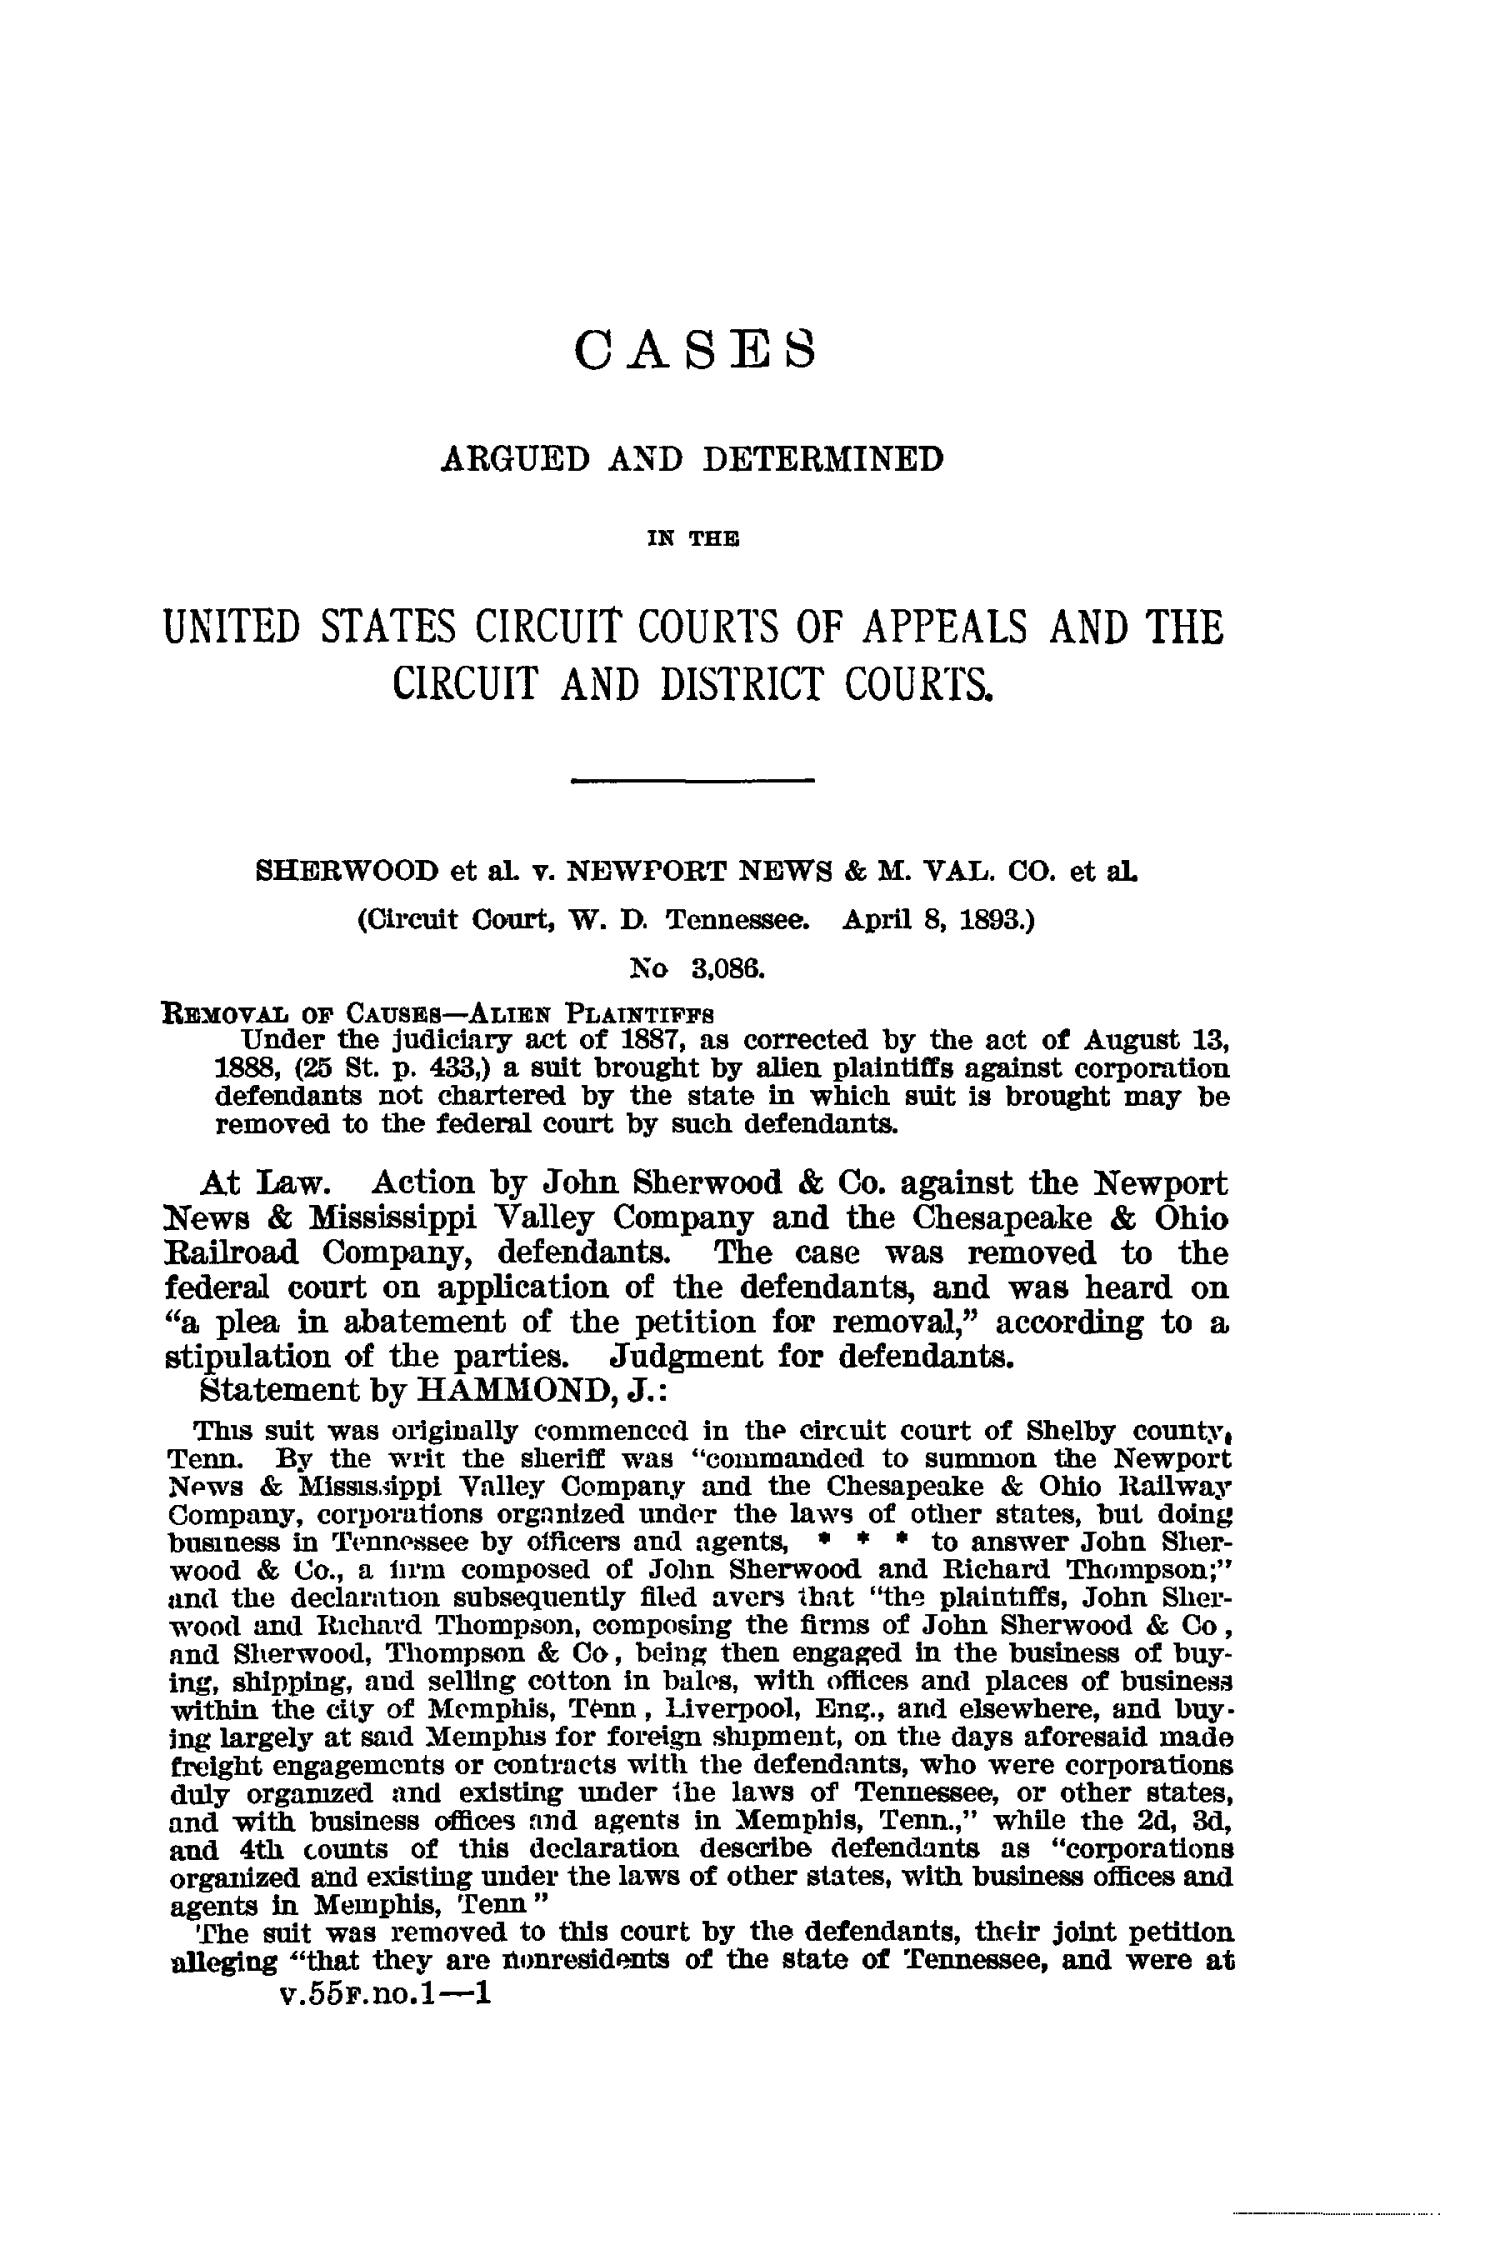 The Federal Reporter. Volume 55 Cases Argued and Determined in the Circuit Courts of Appeals and Circuit and District Courts of the United States. May-July, 1893.
                                                
                                                    1
                                                